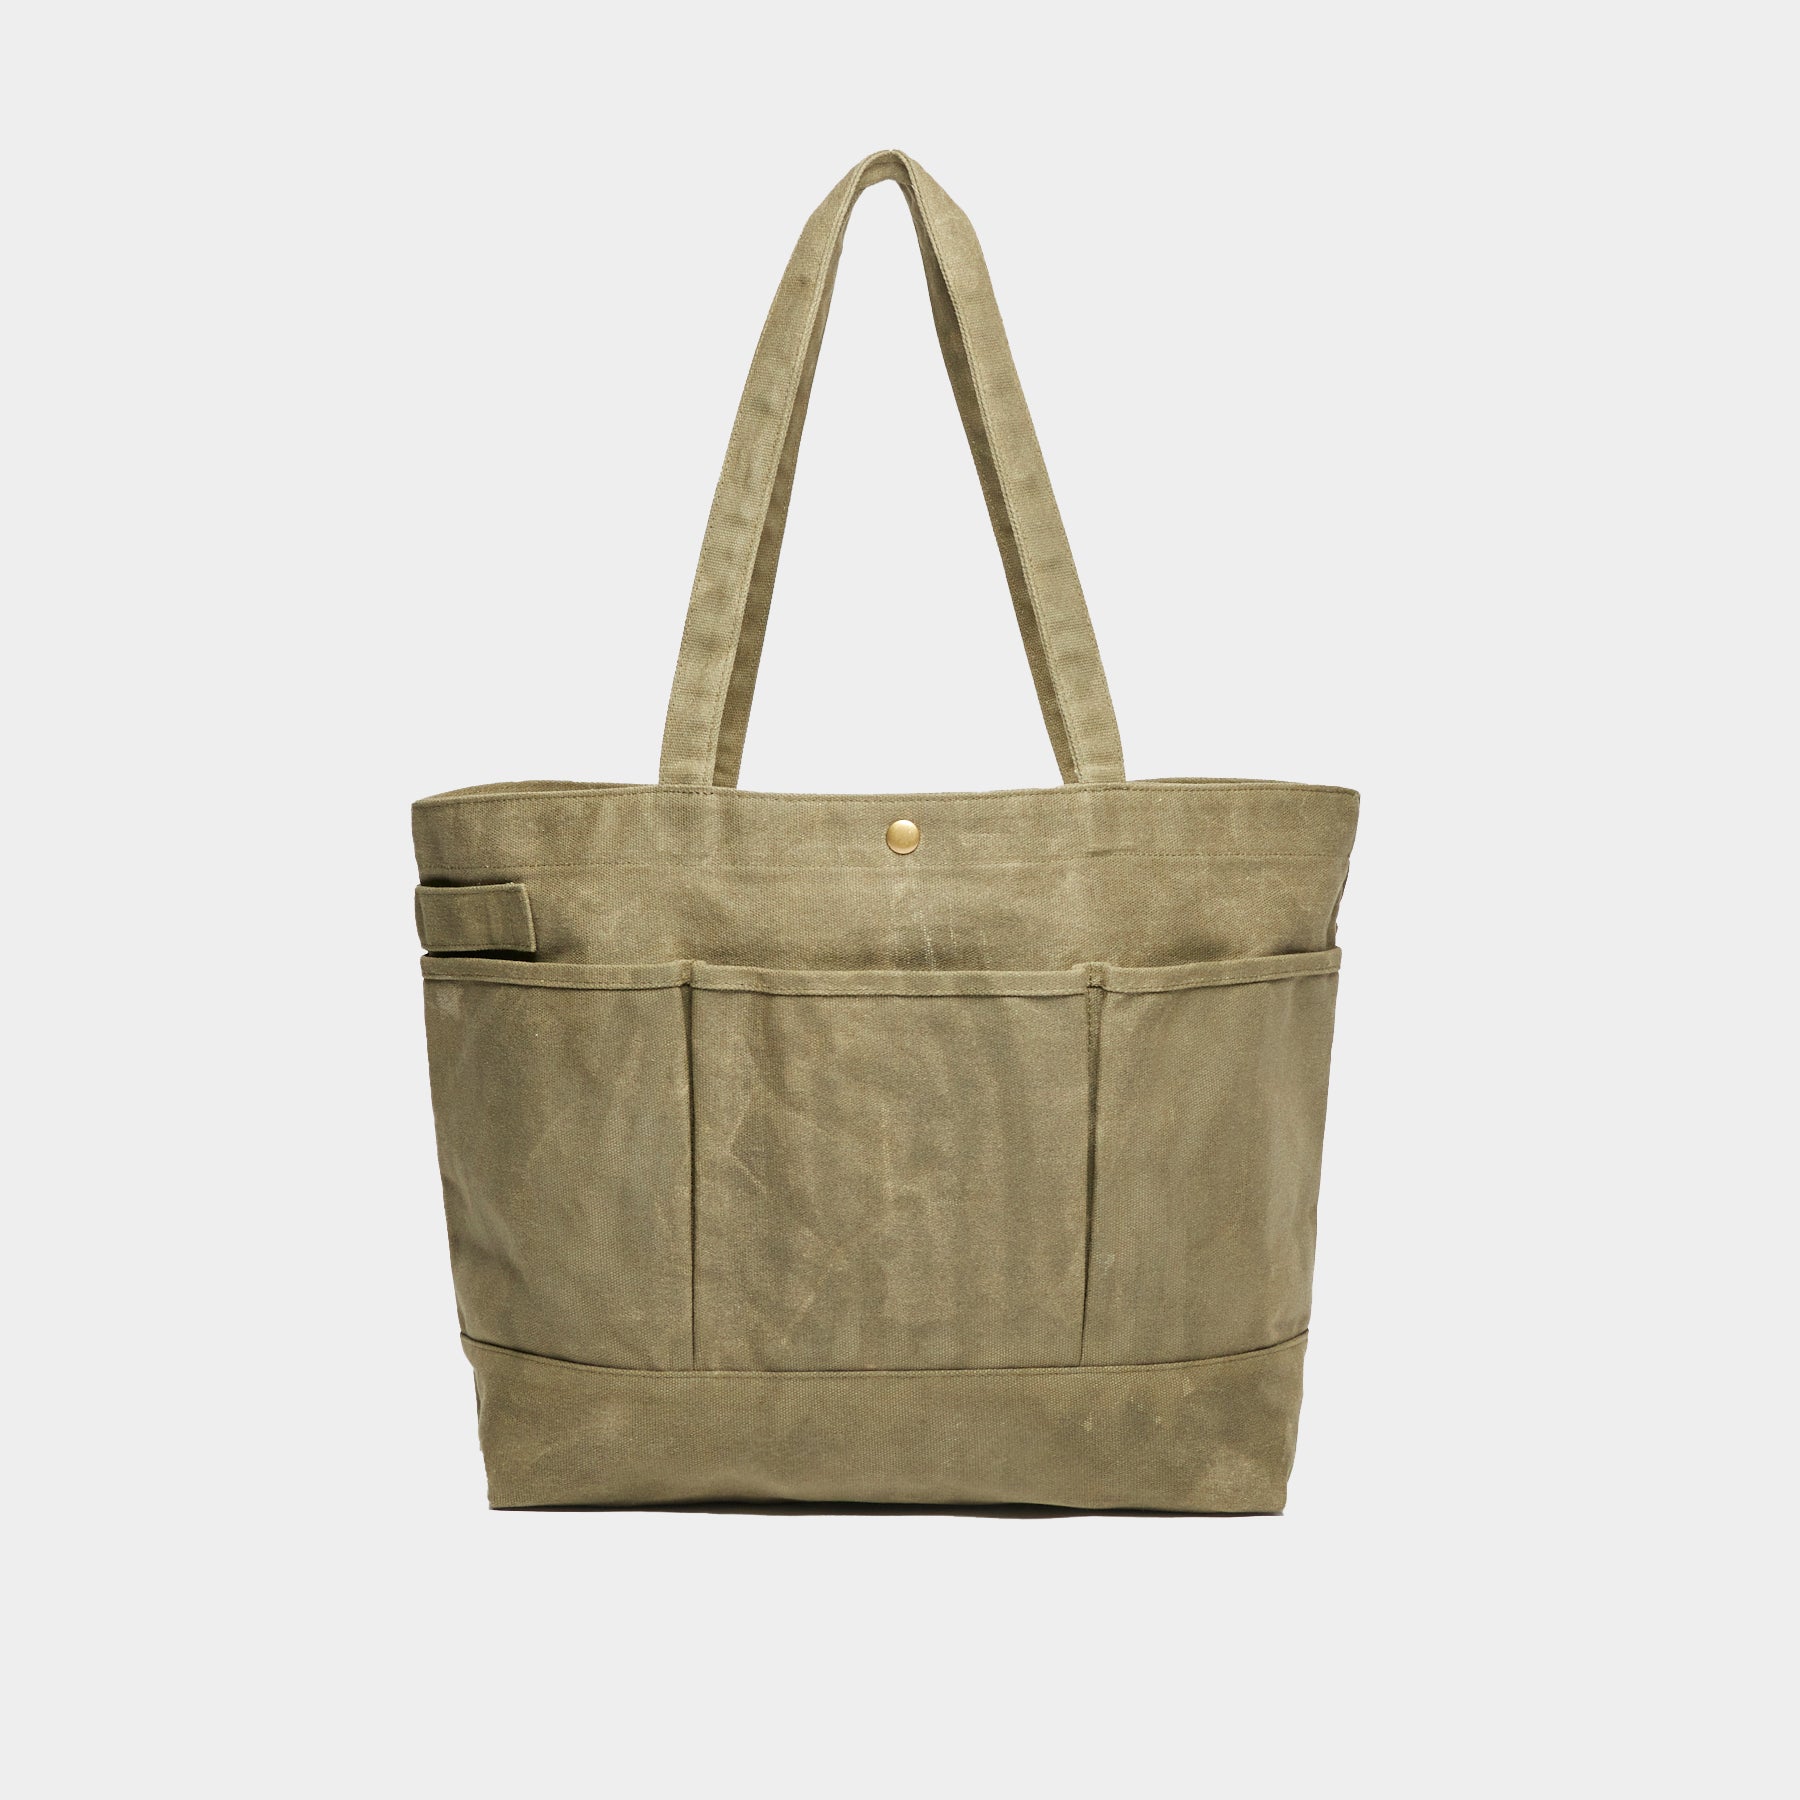 Todd Snyder x Gardenheir Waxed Cotton Tote Bag in Olive